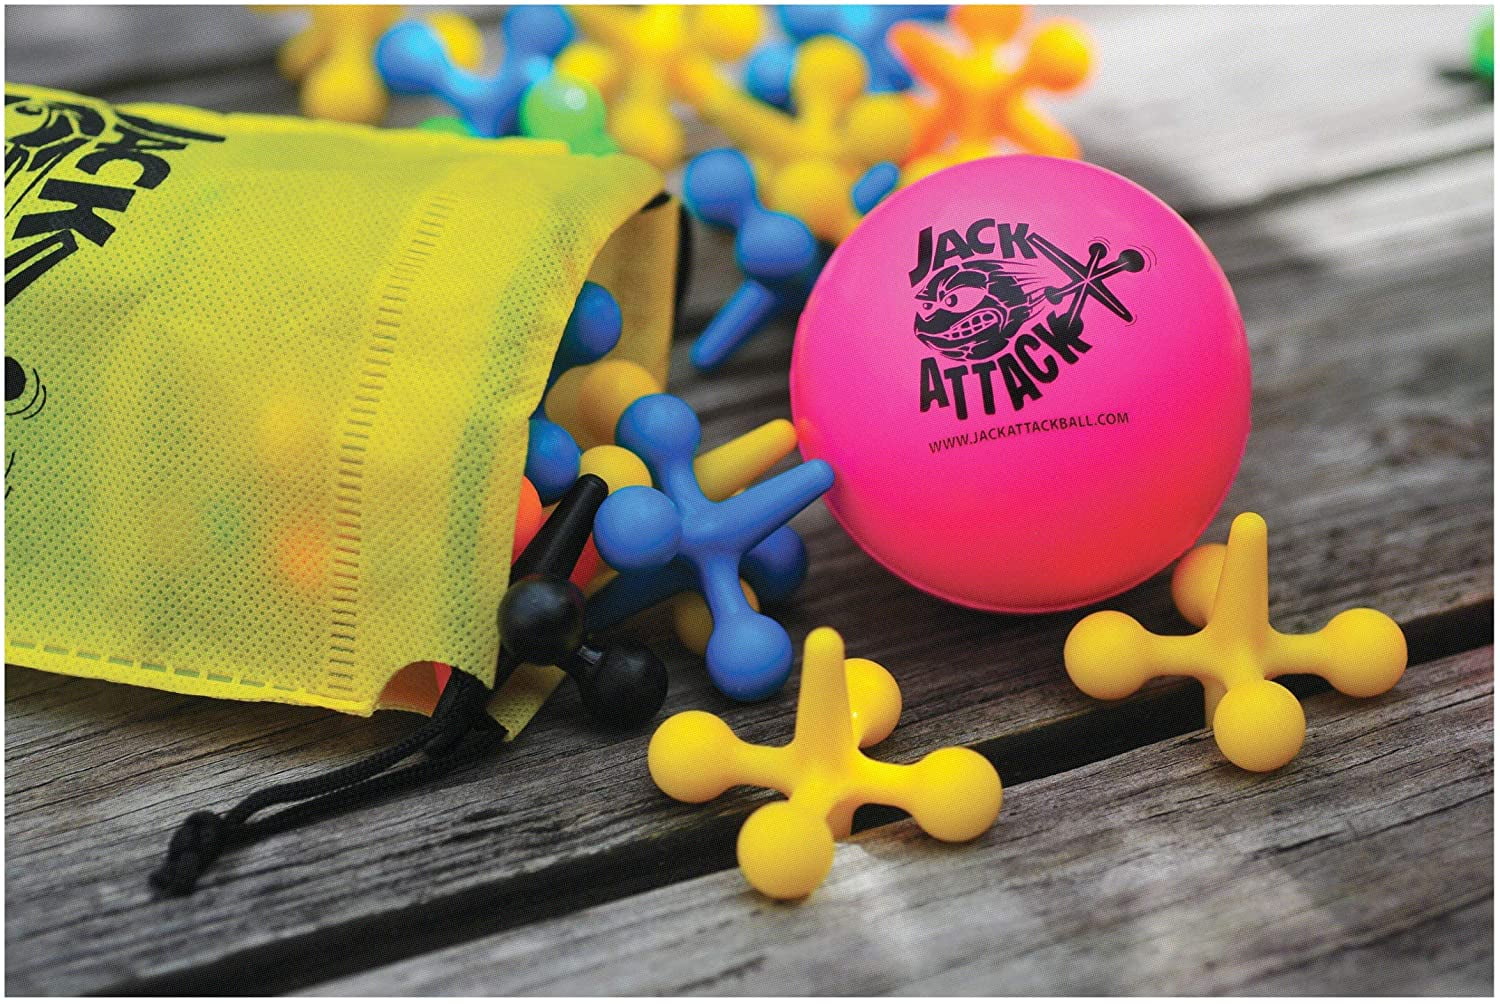 5 SETS OF NEW LARGE SIZE NEON JACKS AND RUBBER BOUNCE BALL GAME CLASSIC KIDS TOY 